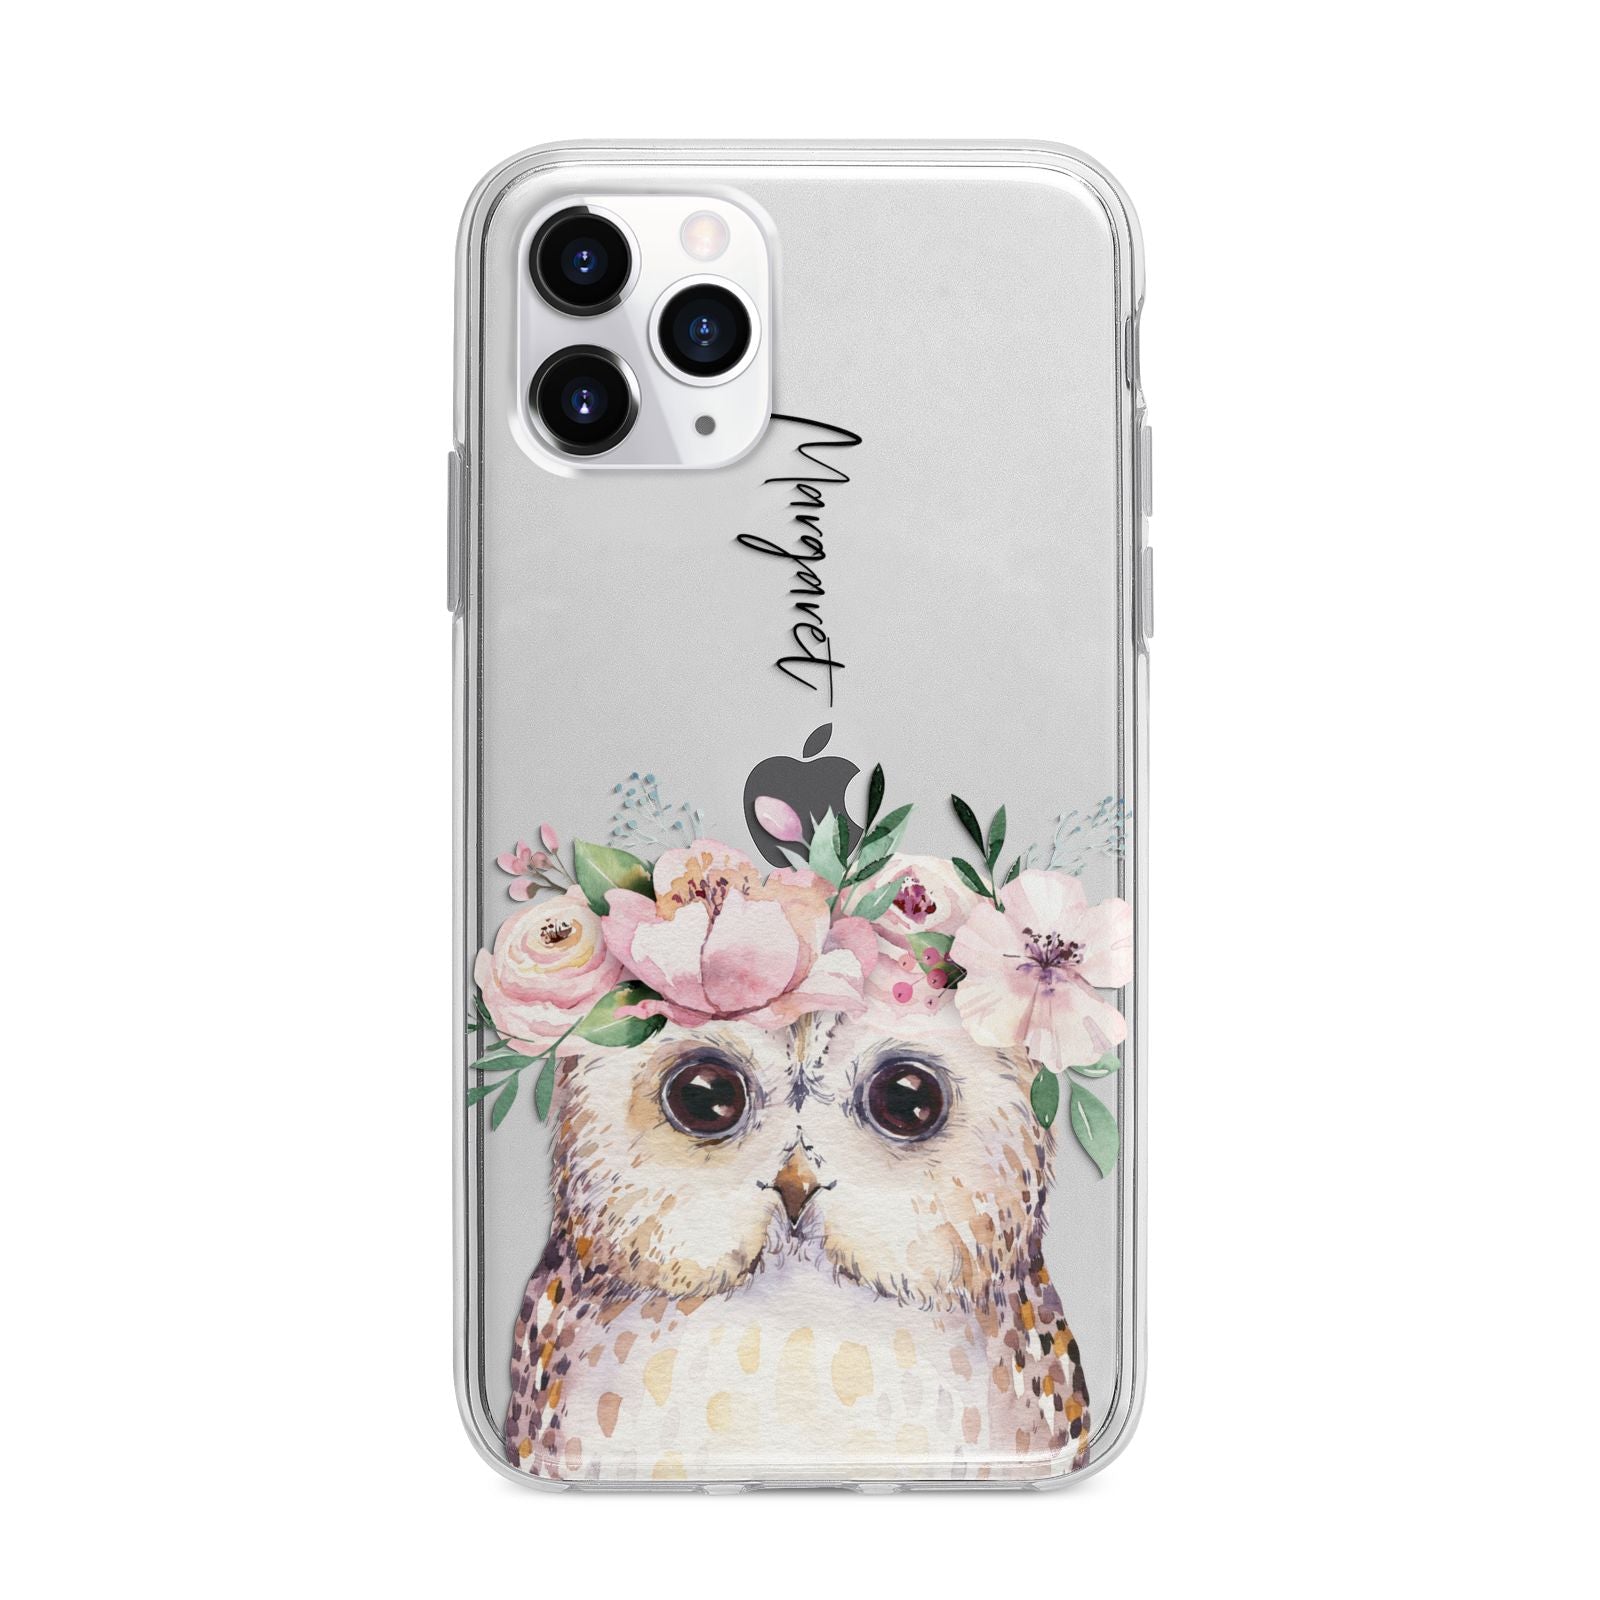 Personalised Name Owl Apple iPhone 11 Pro Max in Silver with Bumper Case